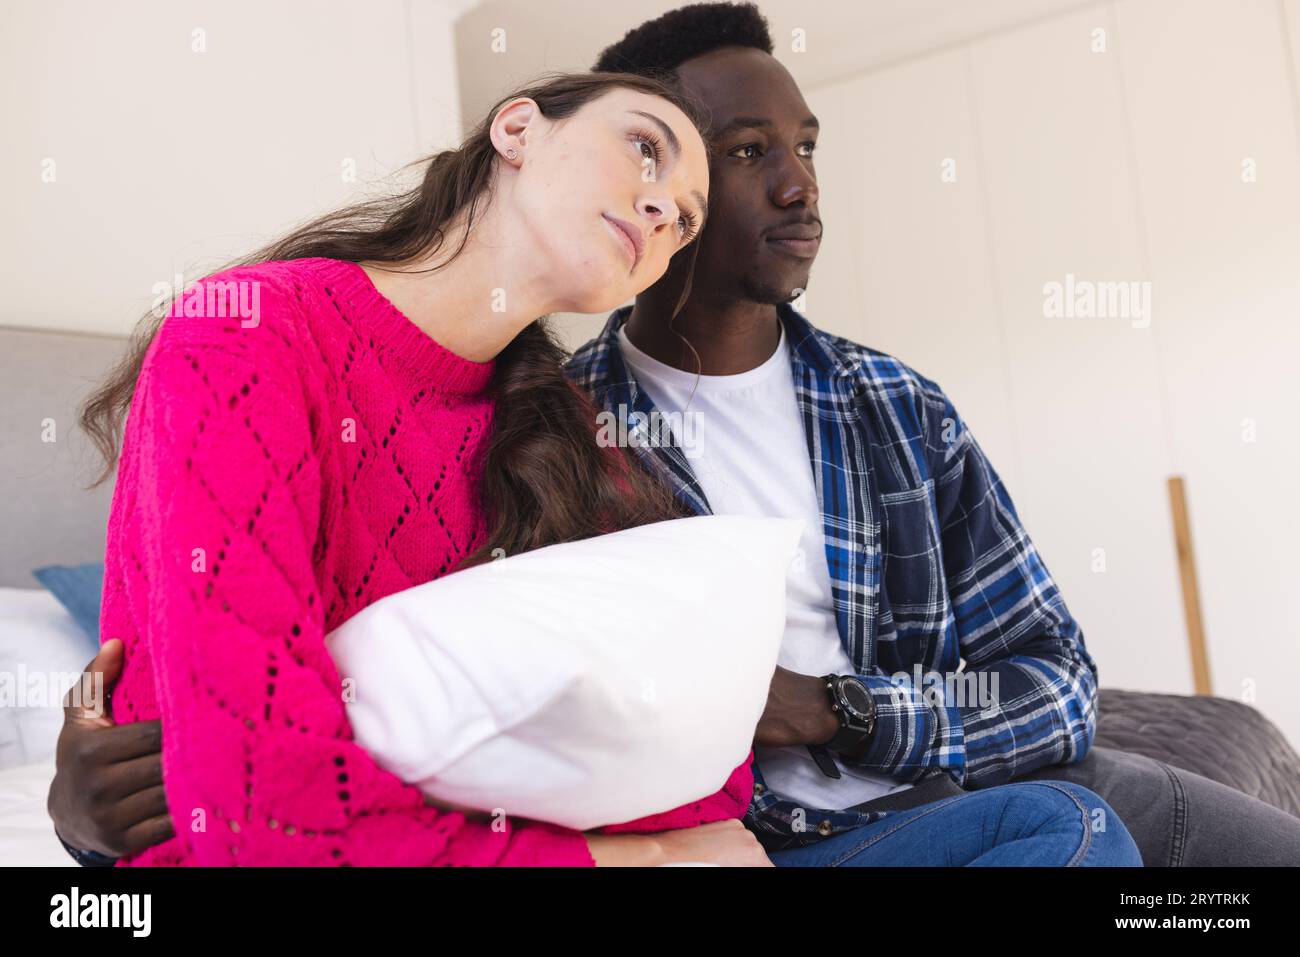 Sad diverse couple sitting on bed and embracing at home Stock Photo